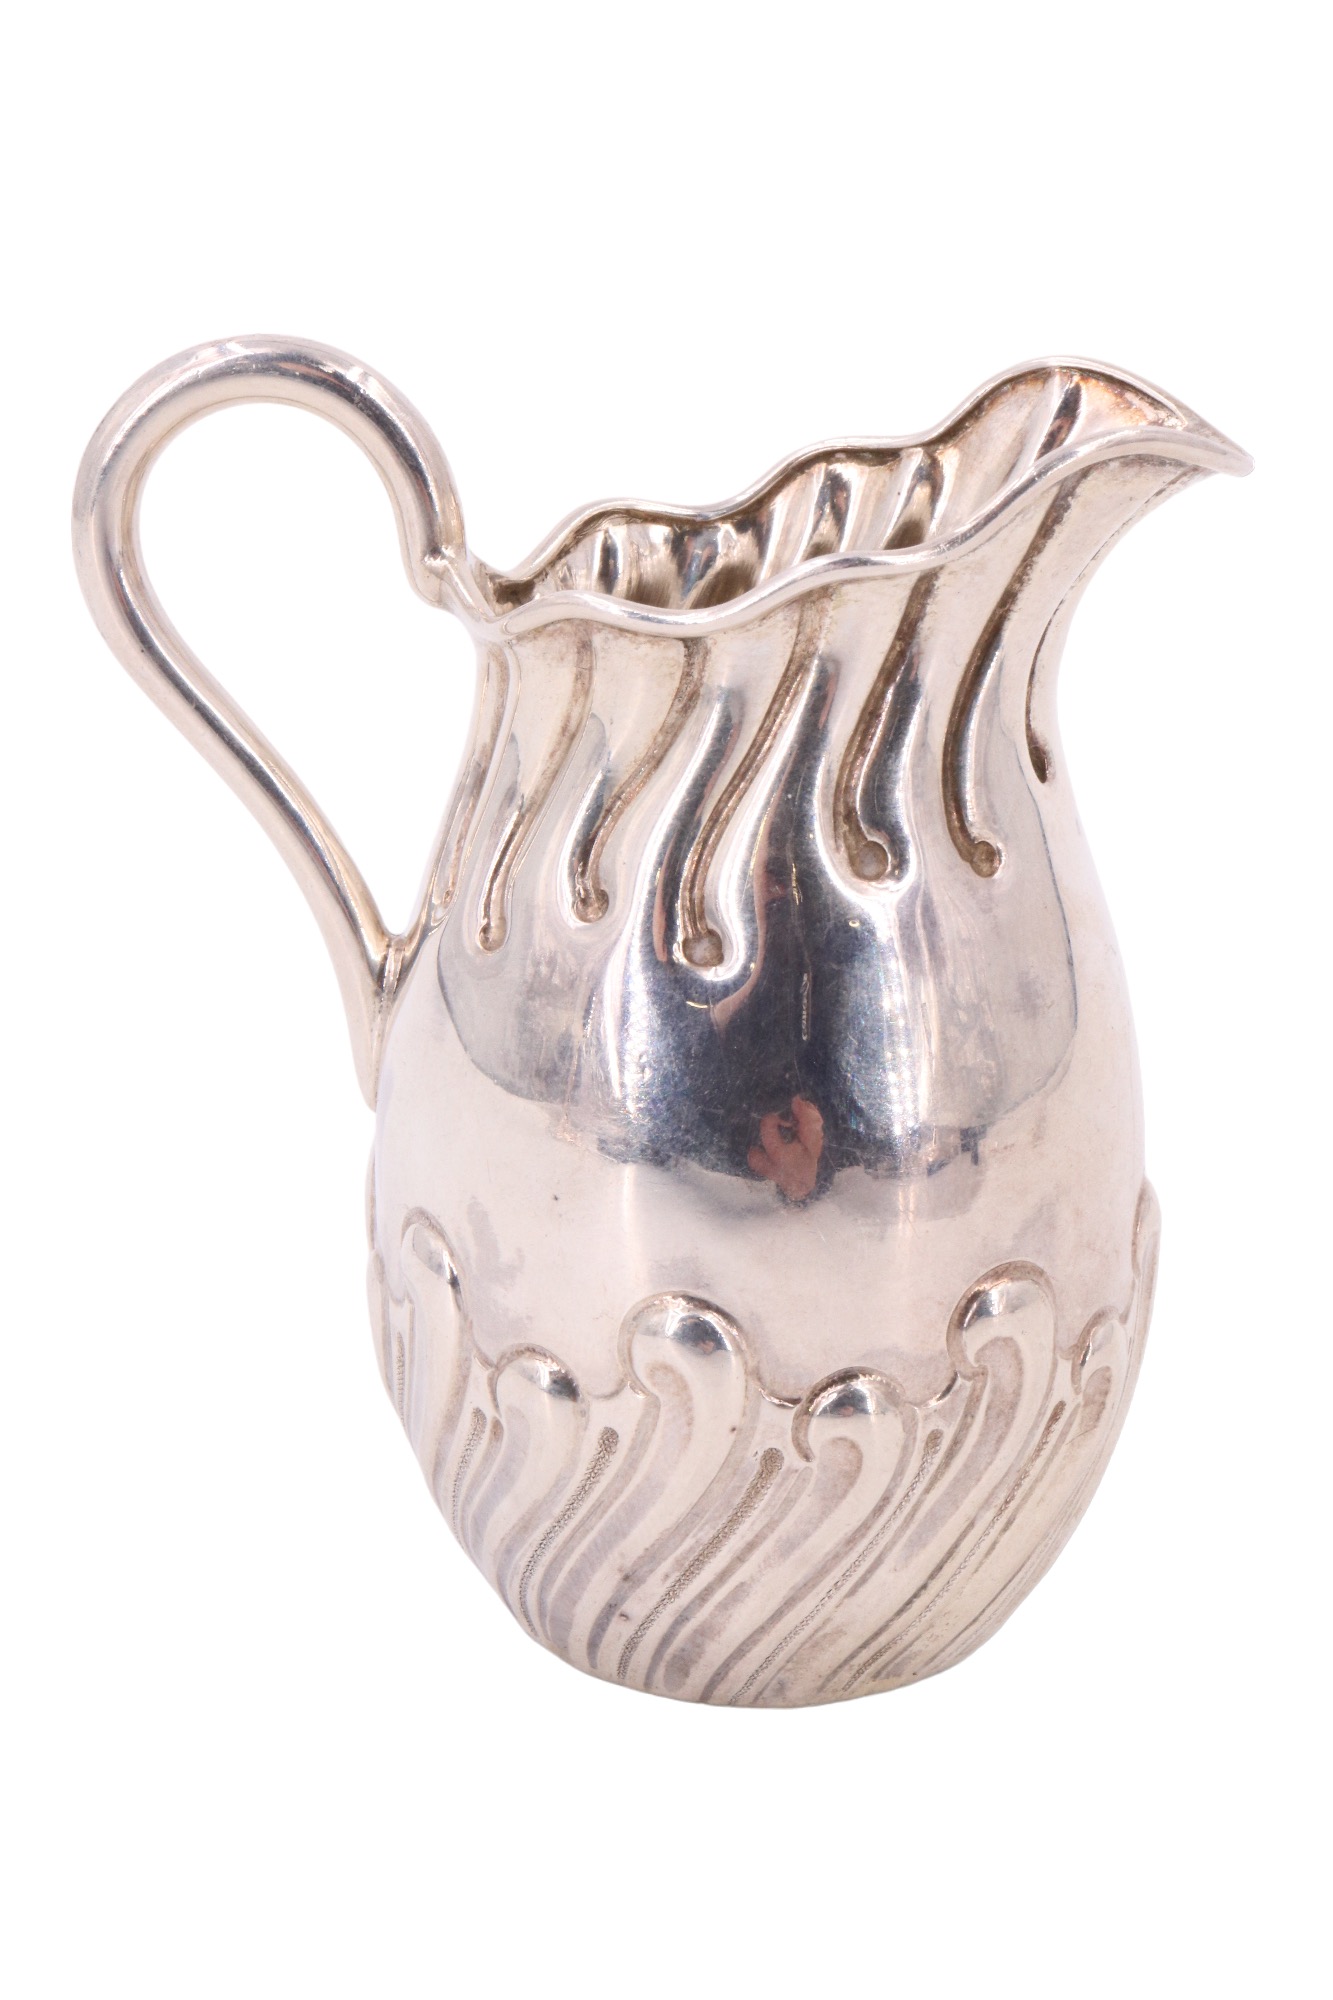 A diminutive Victorian silver cream jug, decorated with embossed stylized honeysuckle reeding, Atkin